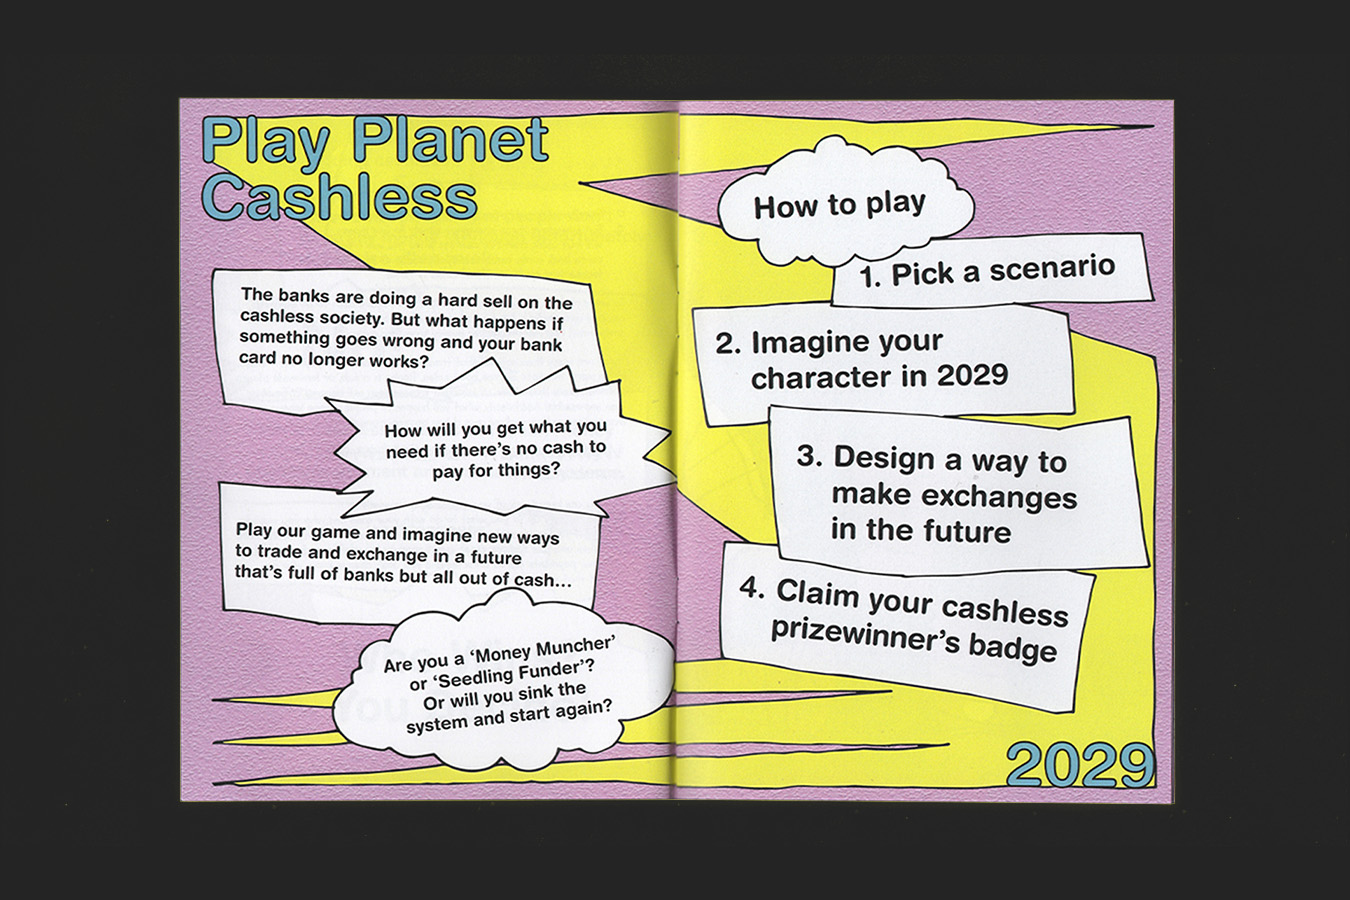 a close up image of the booklet, the double page spread shows how to play the planet cashless game